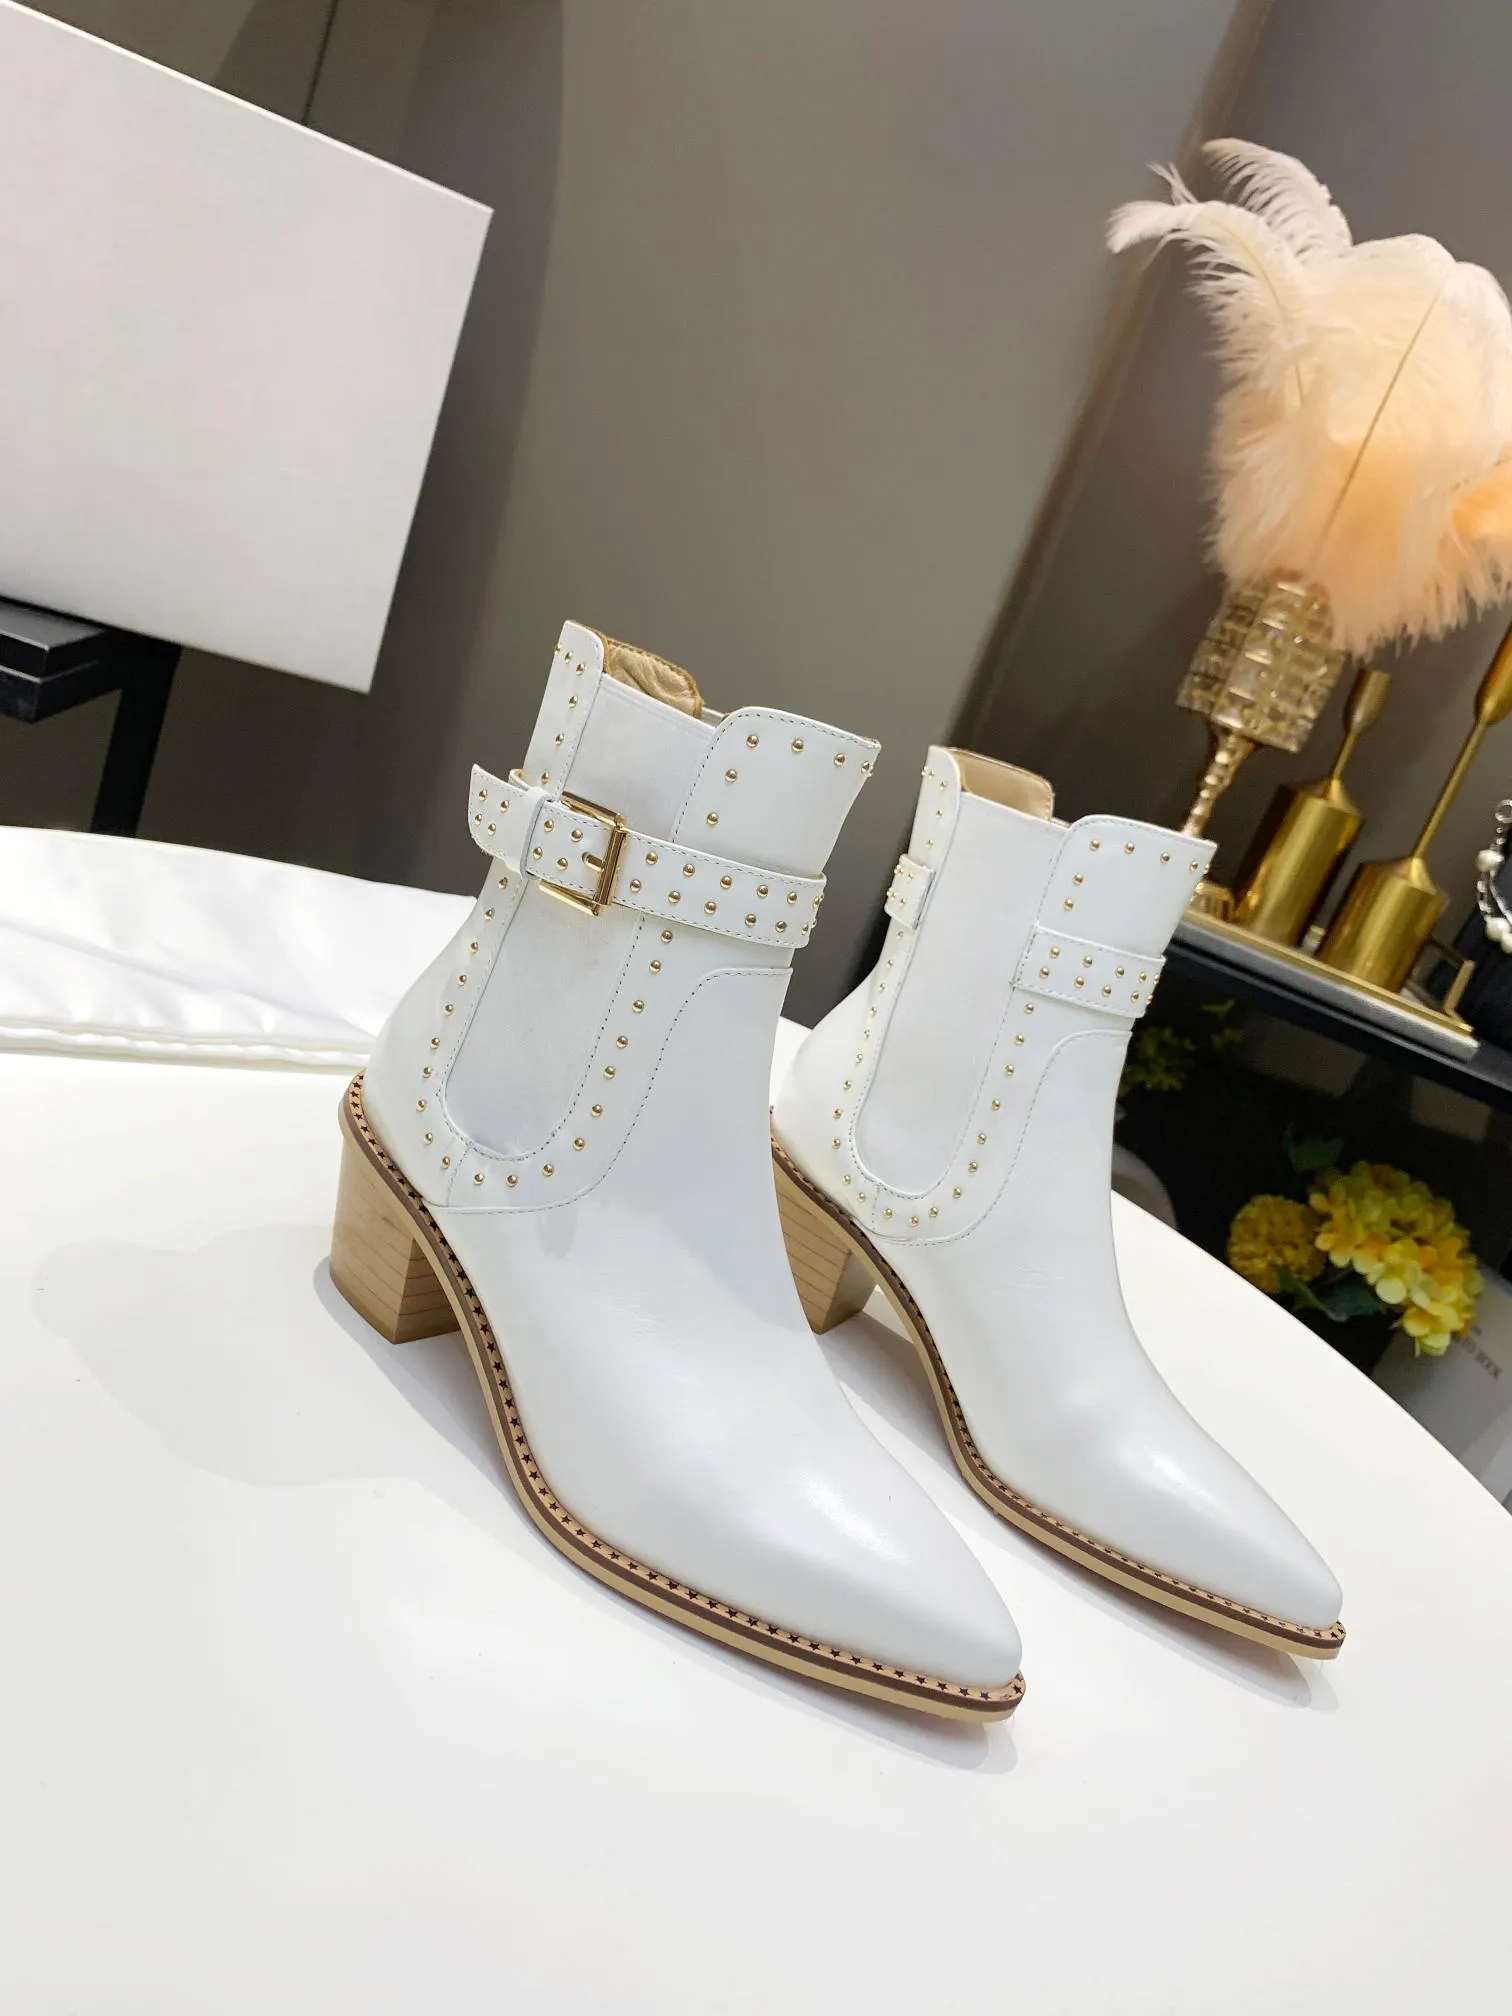 High heeled Fashion rivet boots Autumn winter Coarse heel designer women shoes 100% Soft cowhide womens Zipper luxury Boot leather lady Wedges Heels size 35-41 us4-us10